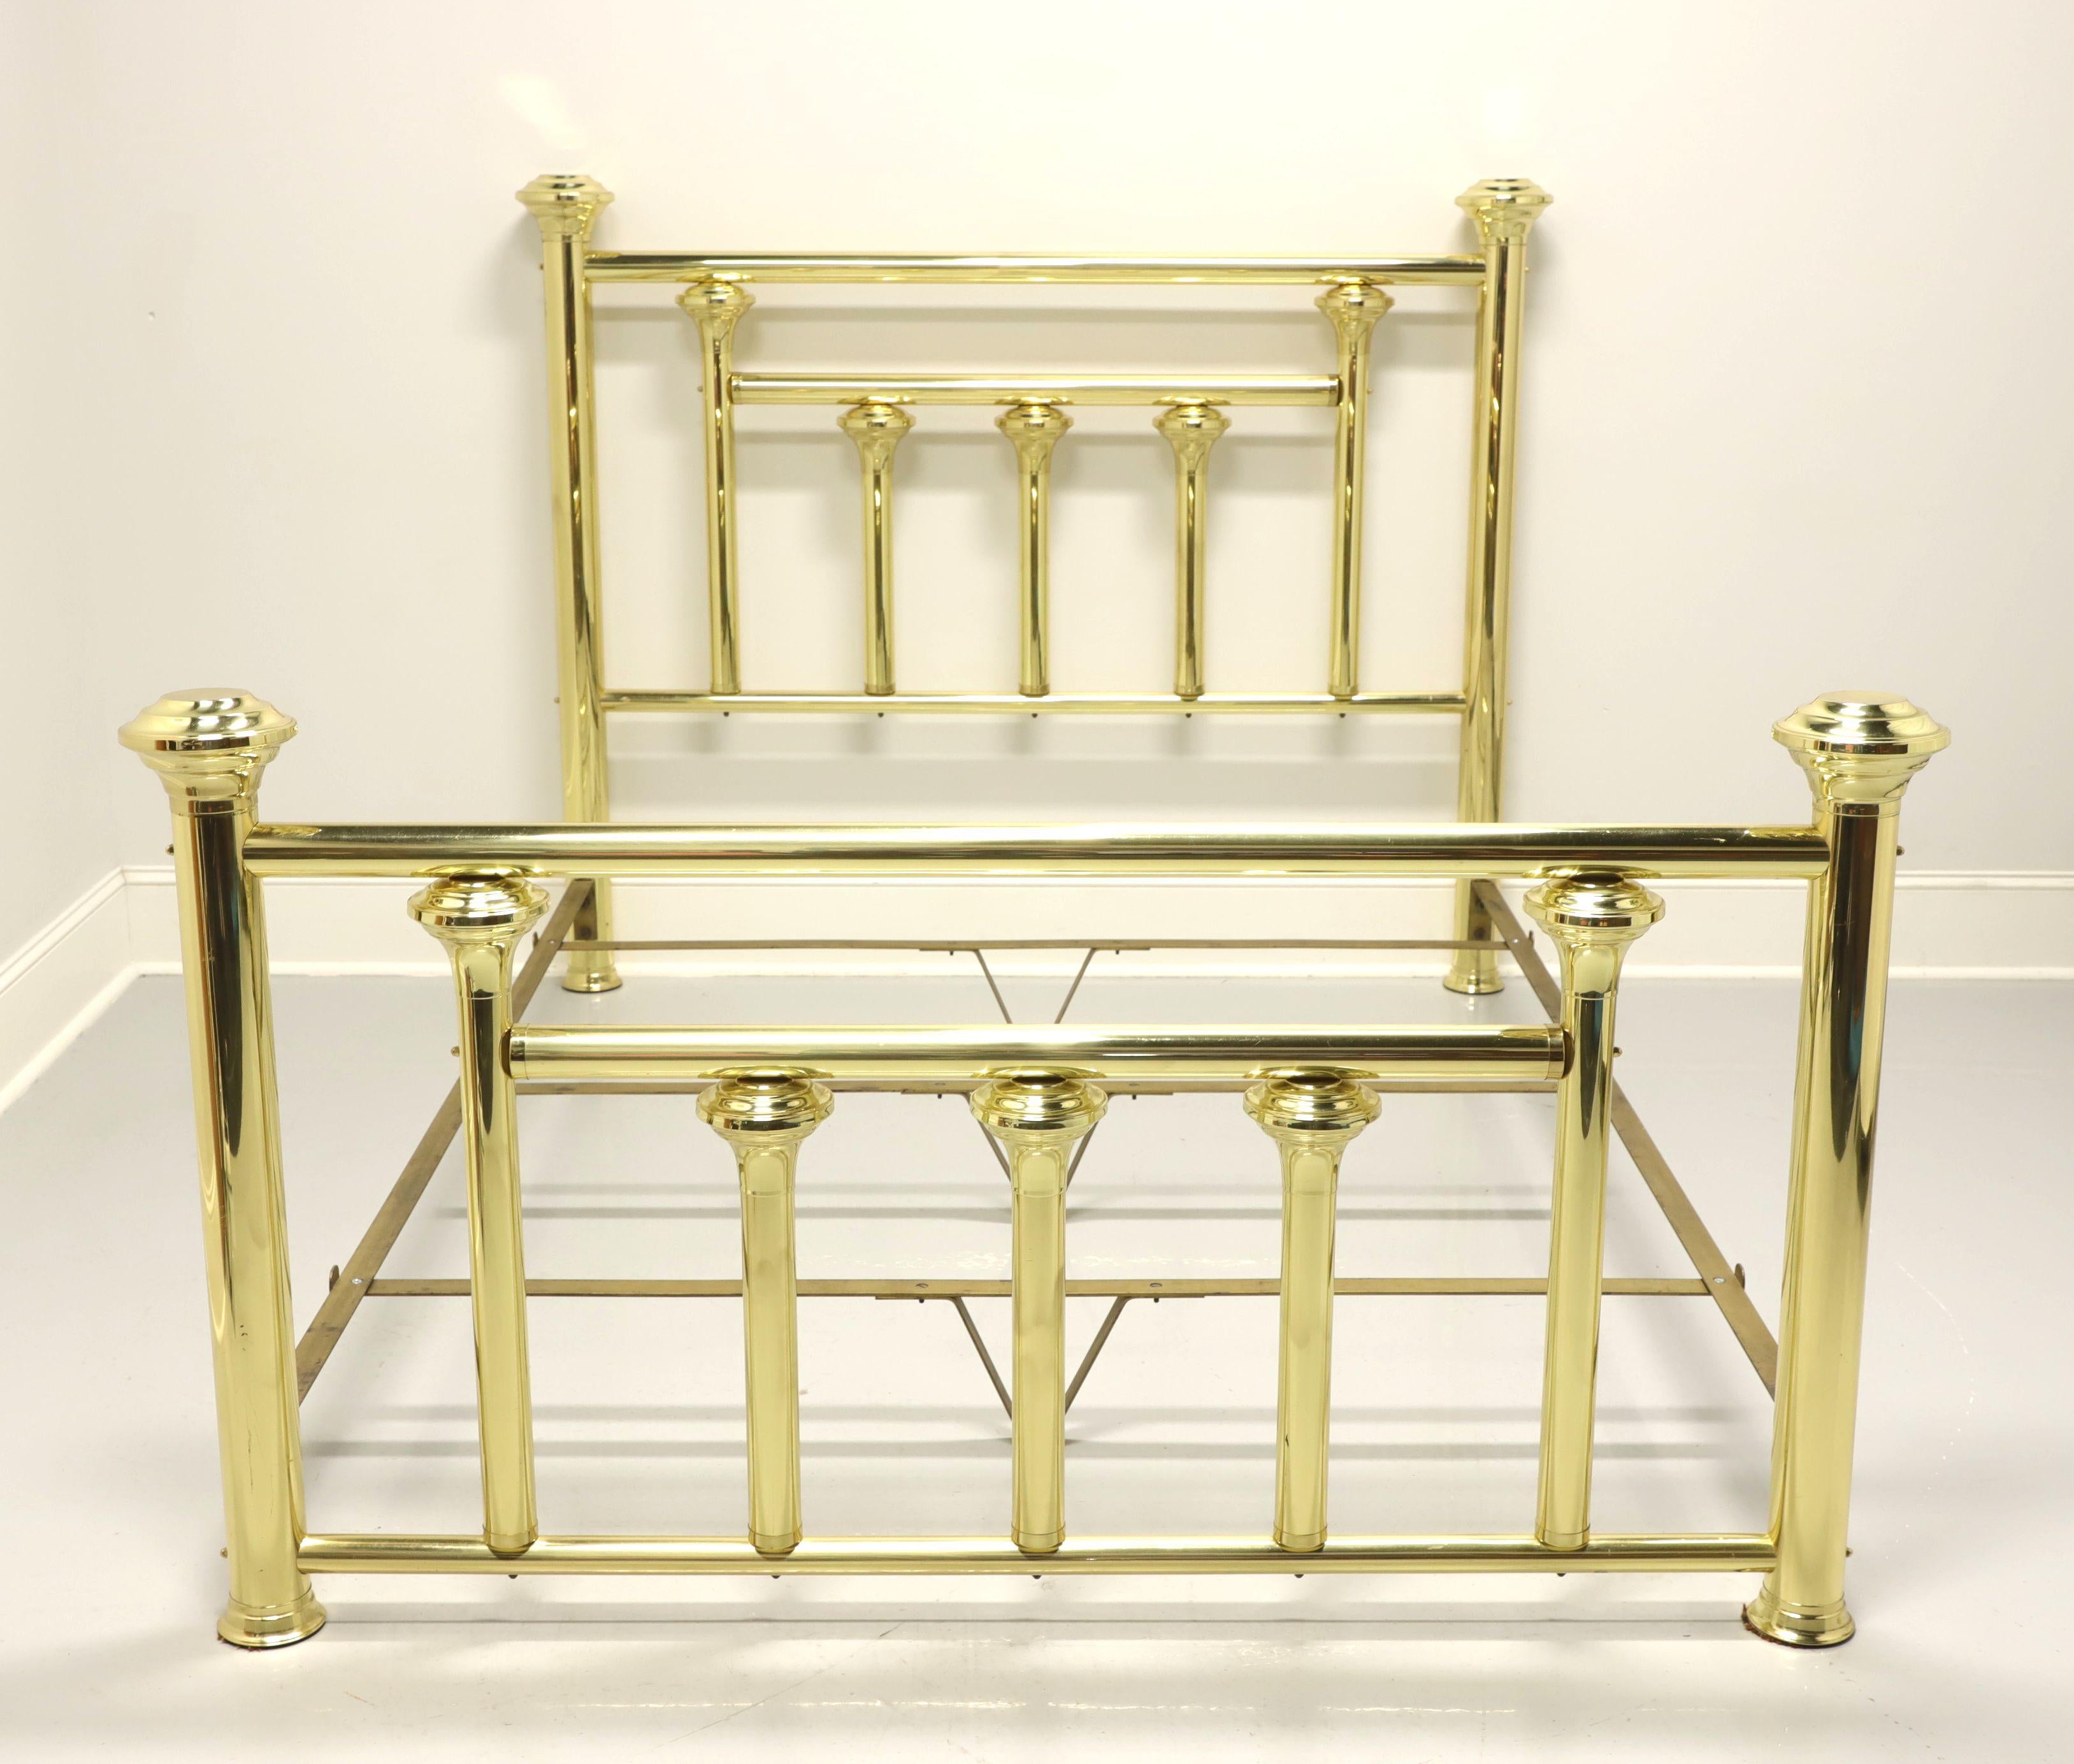 A Victorian style queen size brass bed by Wesley Allen, from their Legacy Collection. Solid brass headboard & footboard with bolt held metal side rails and metal slats. Features a headboard and footboard with large capped tubular shaped posts in an